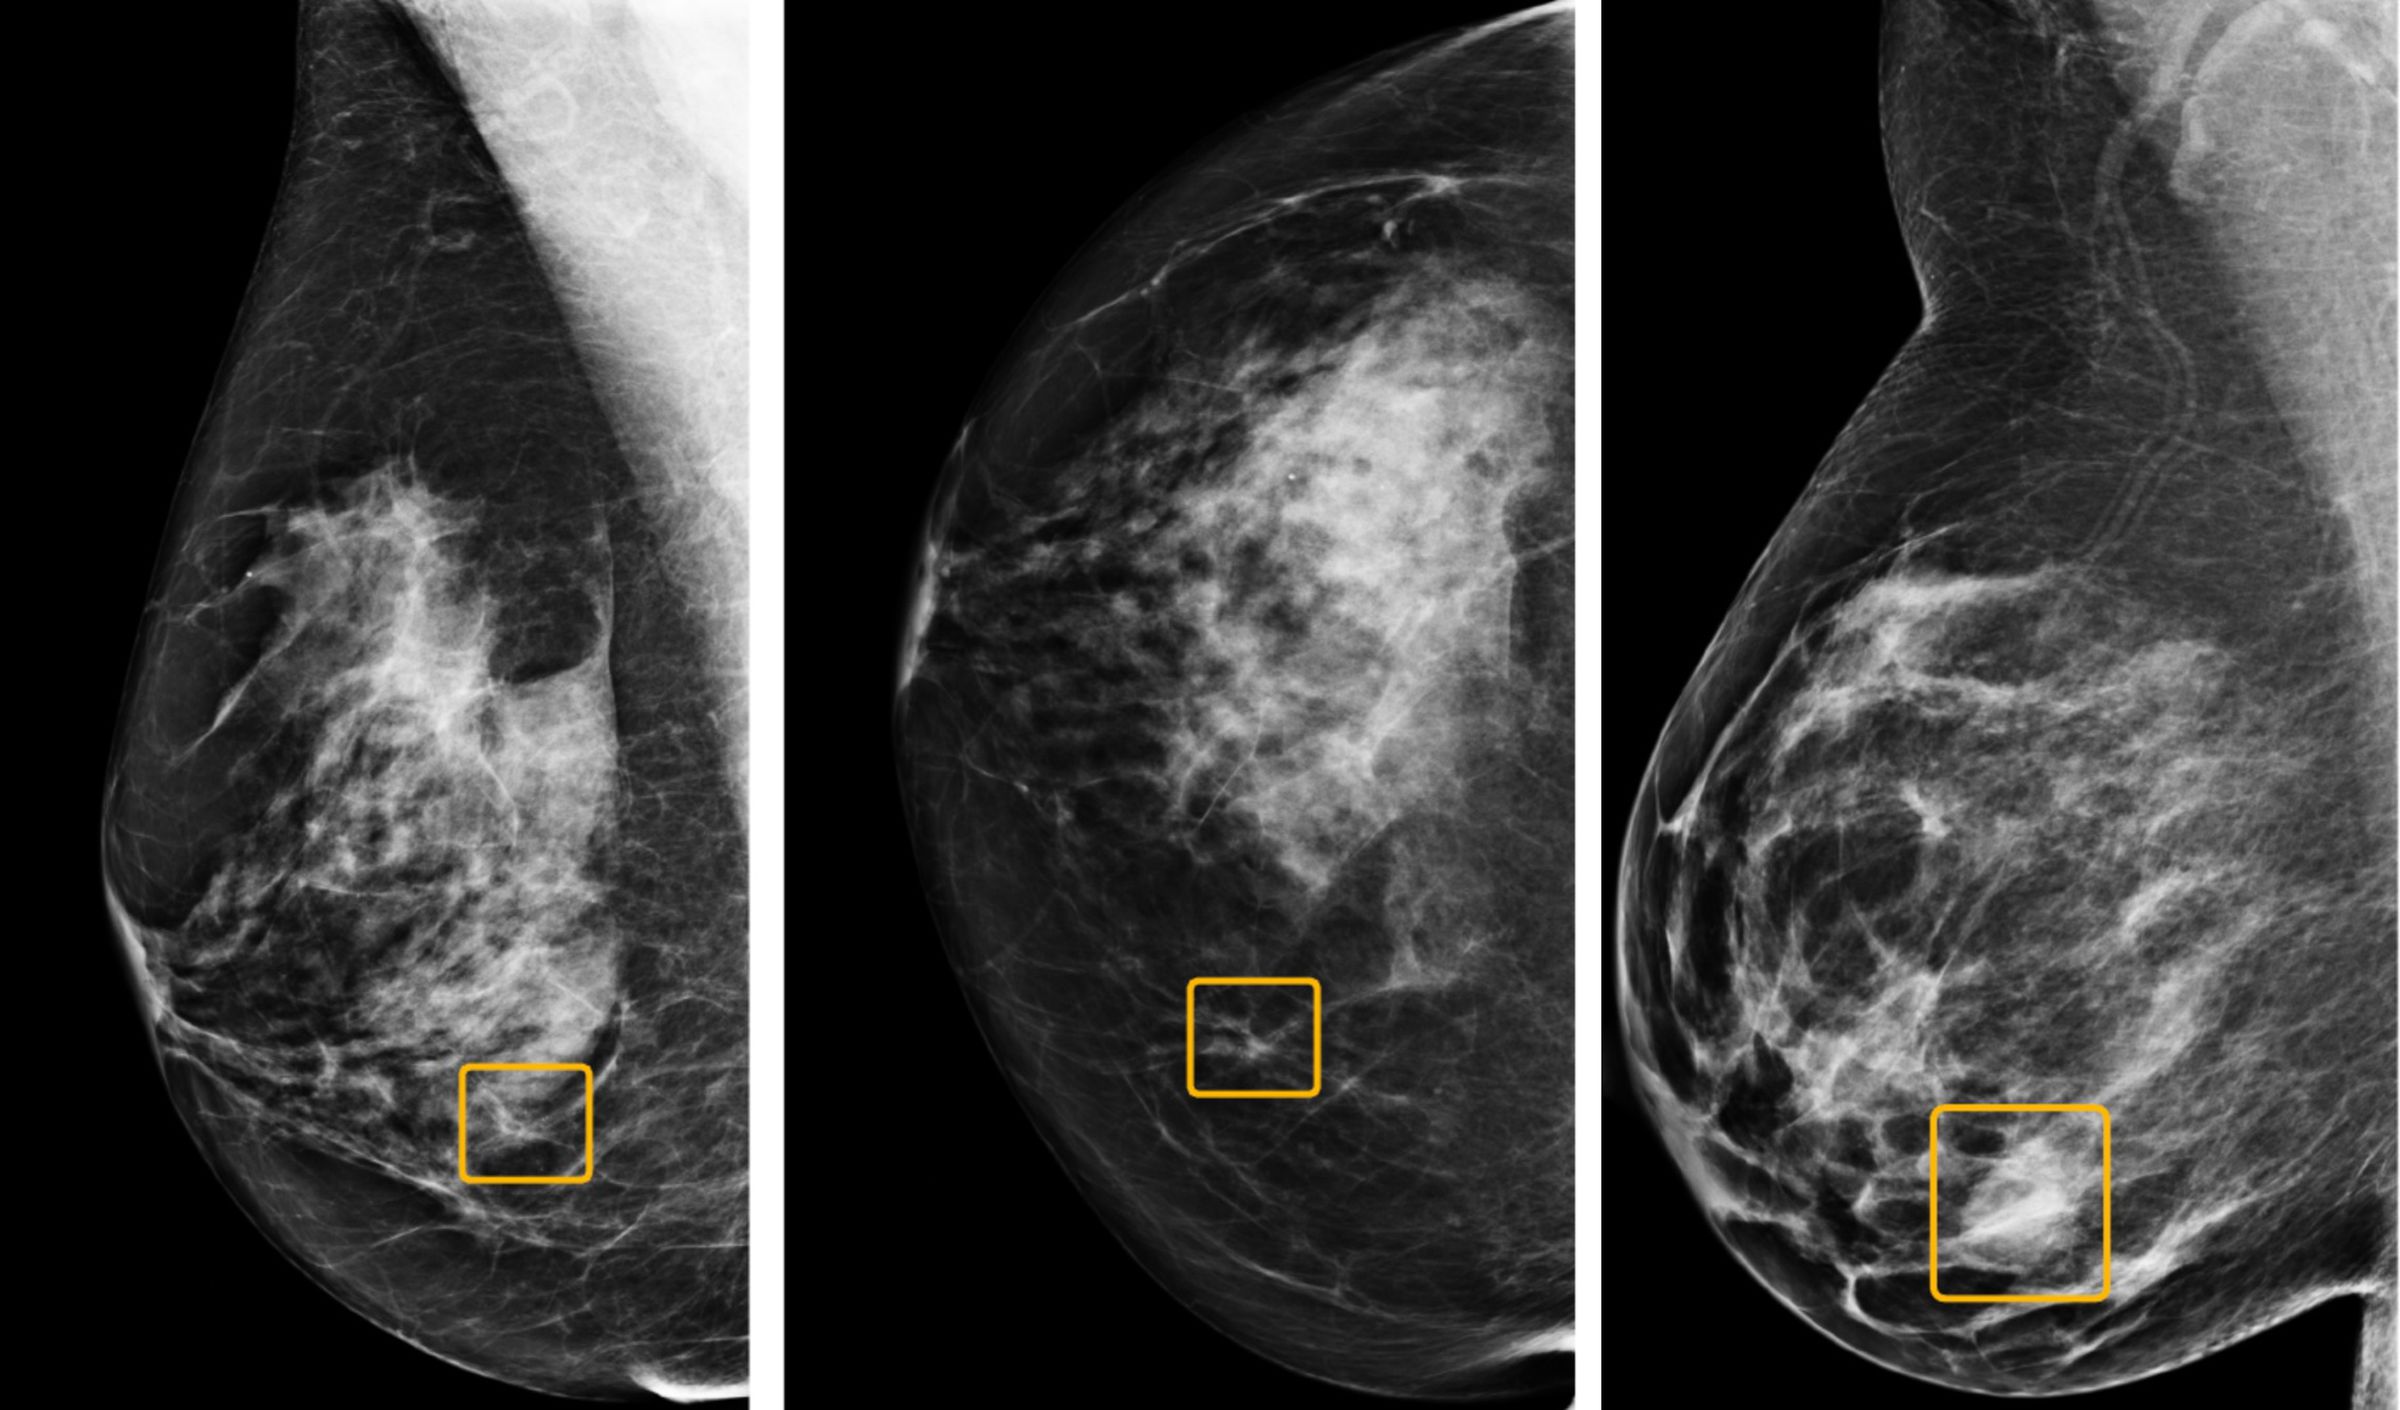 Google’s algorithm can spot lesions in mammograms more reliably than some doctors, but how should that be applied? 